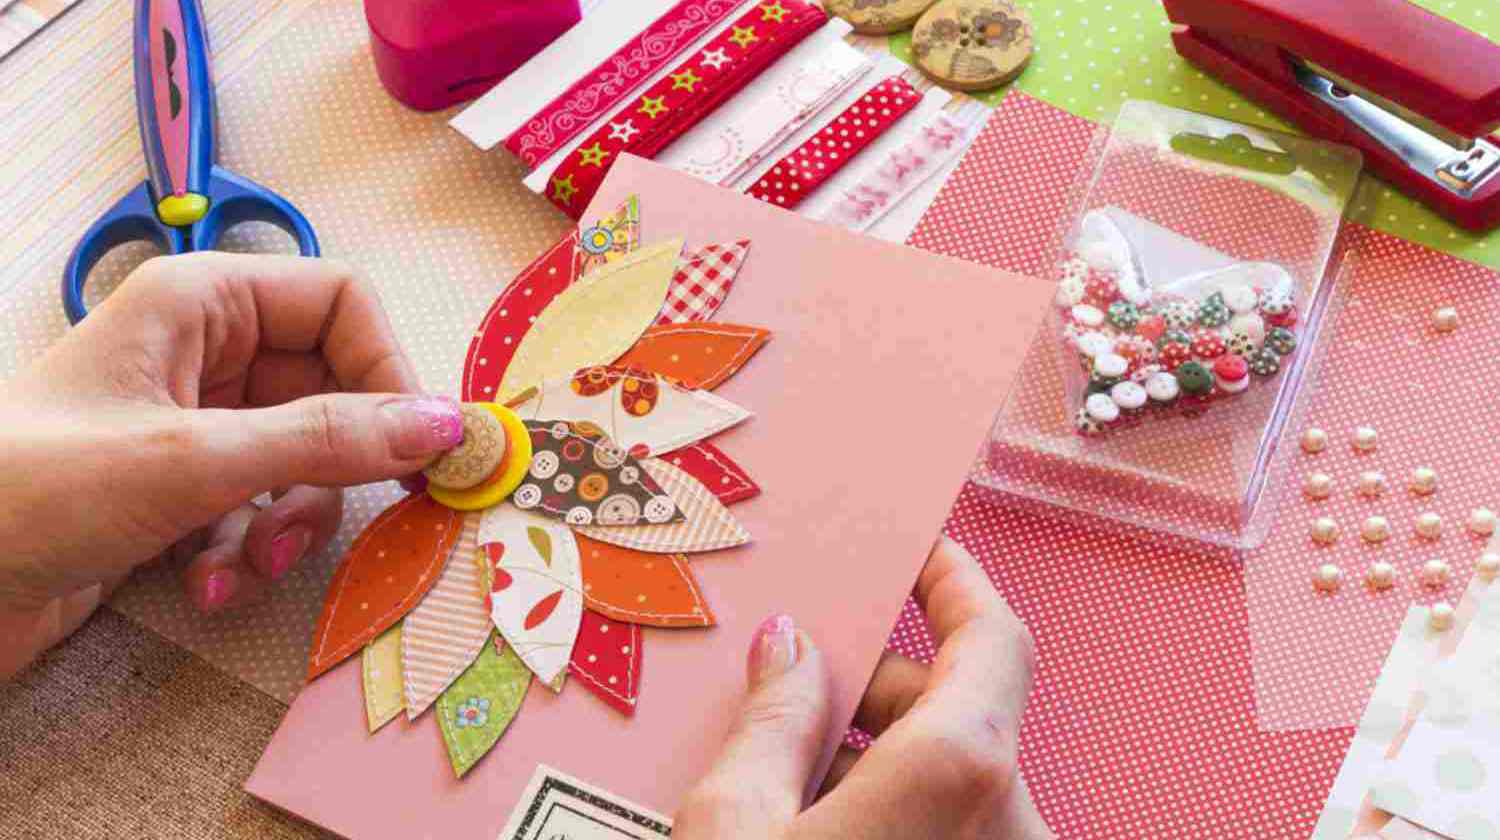 Feature | Making Scrap Book | Cool Scrapbook Ideas Every Crafter Should Know